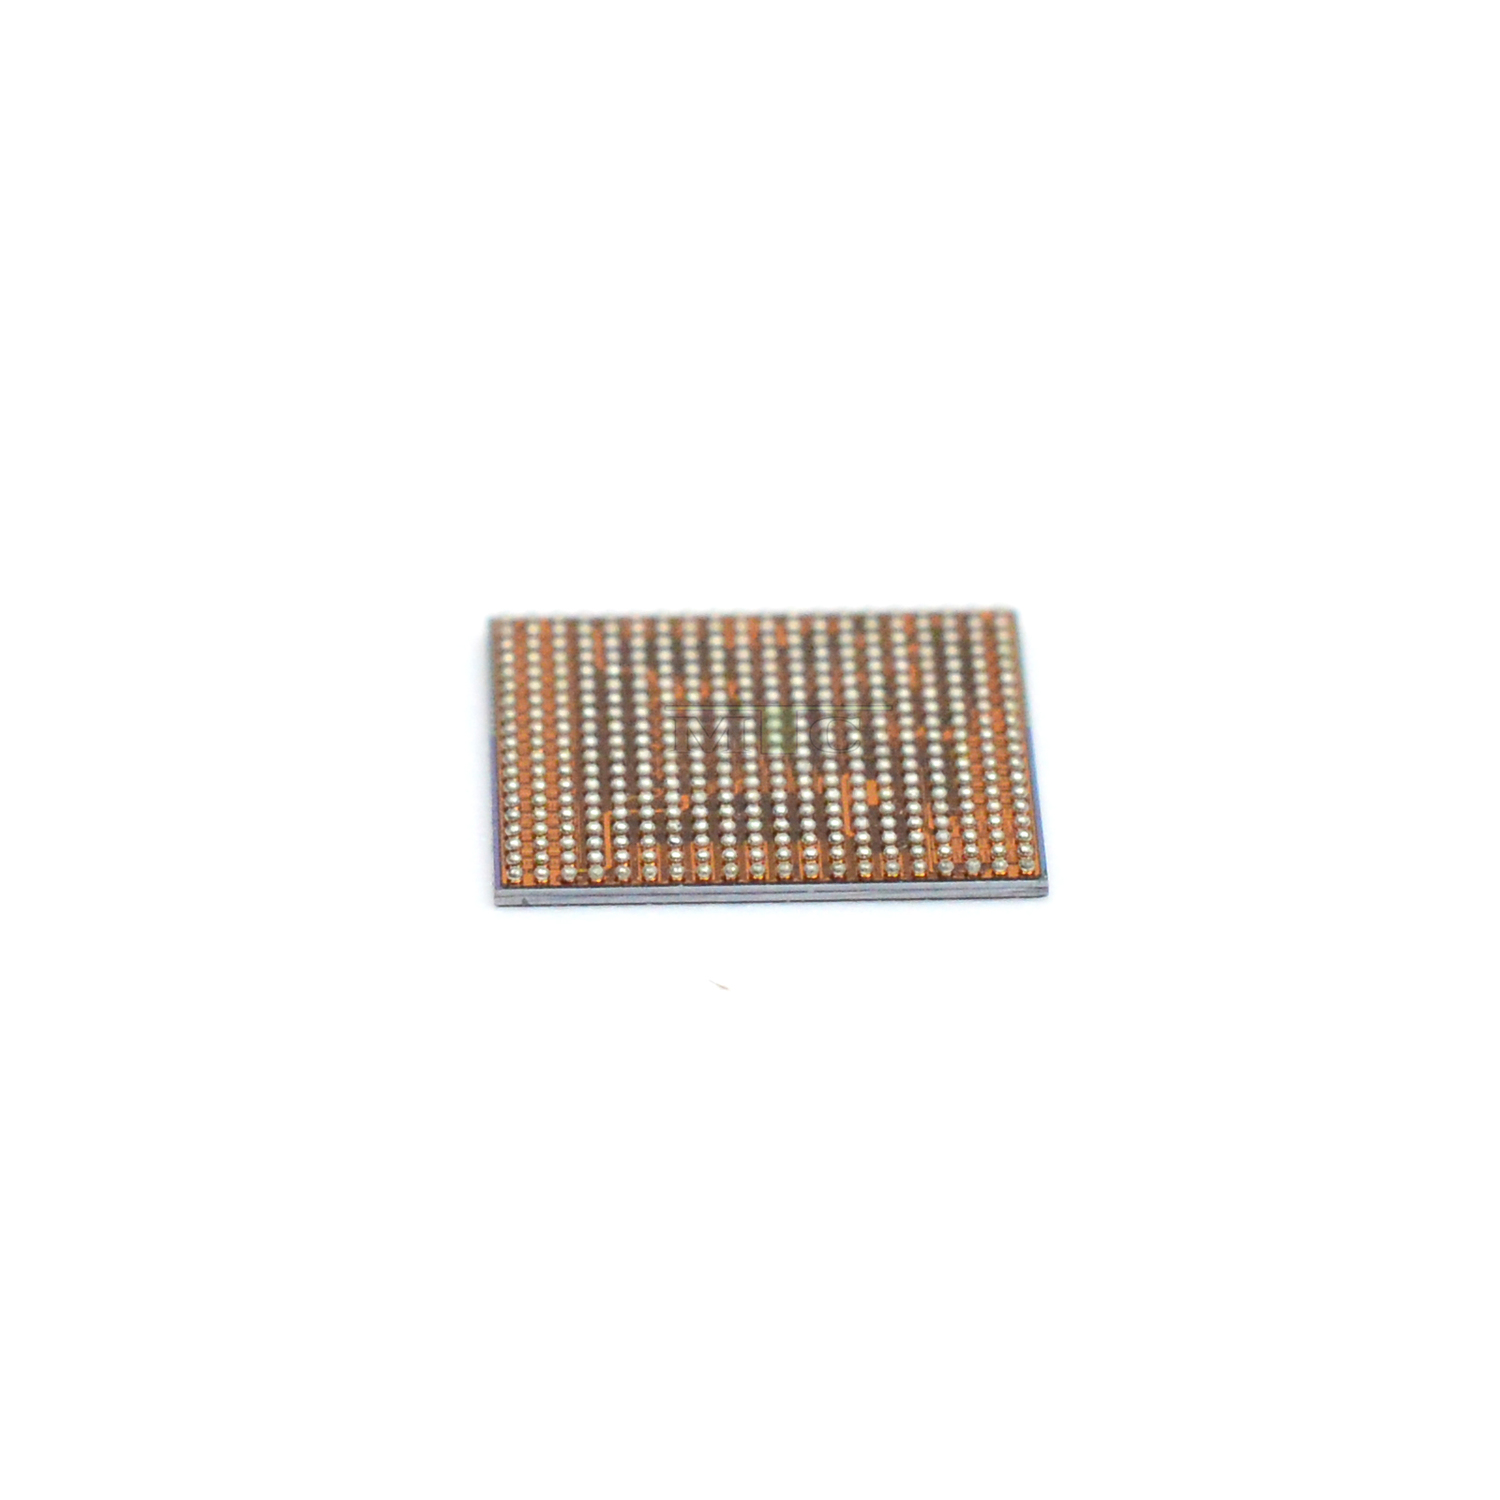 iPhone 6s/6s Plus Main Power IC 338s00120-A1